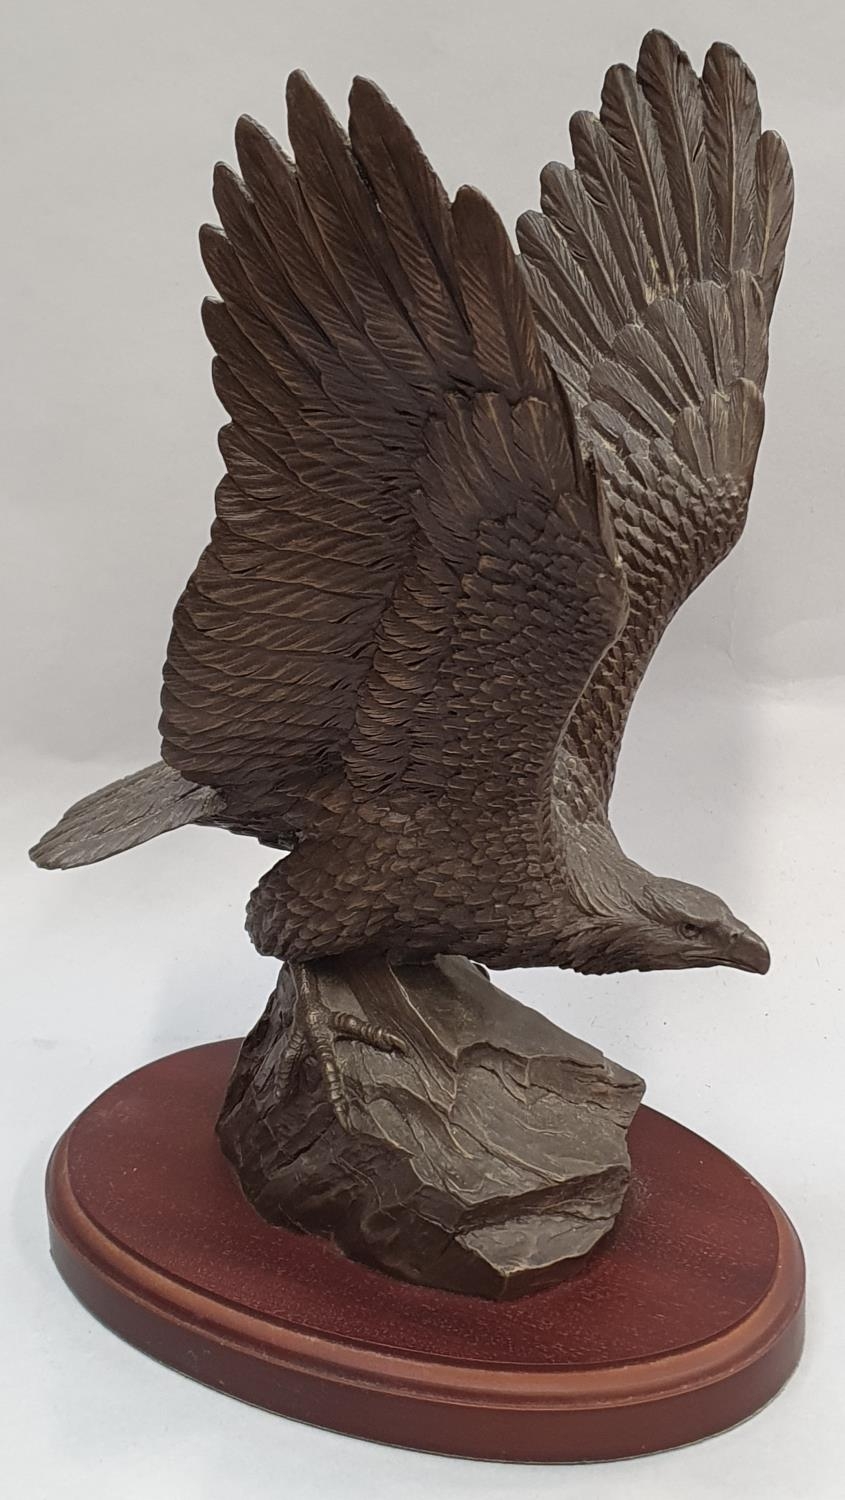 Heredites limited edition eagle by Tom Mackie 406/500 with certificate 32x15.5x21cm. - Image 3 of 8